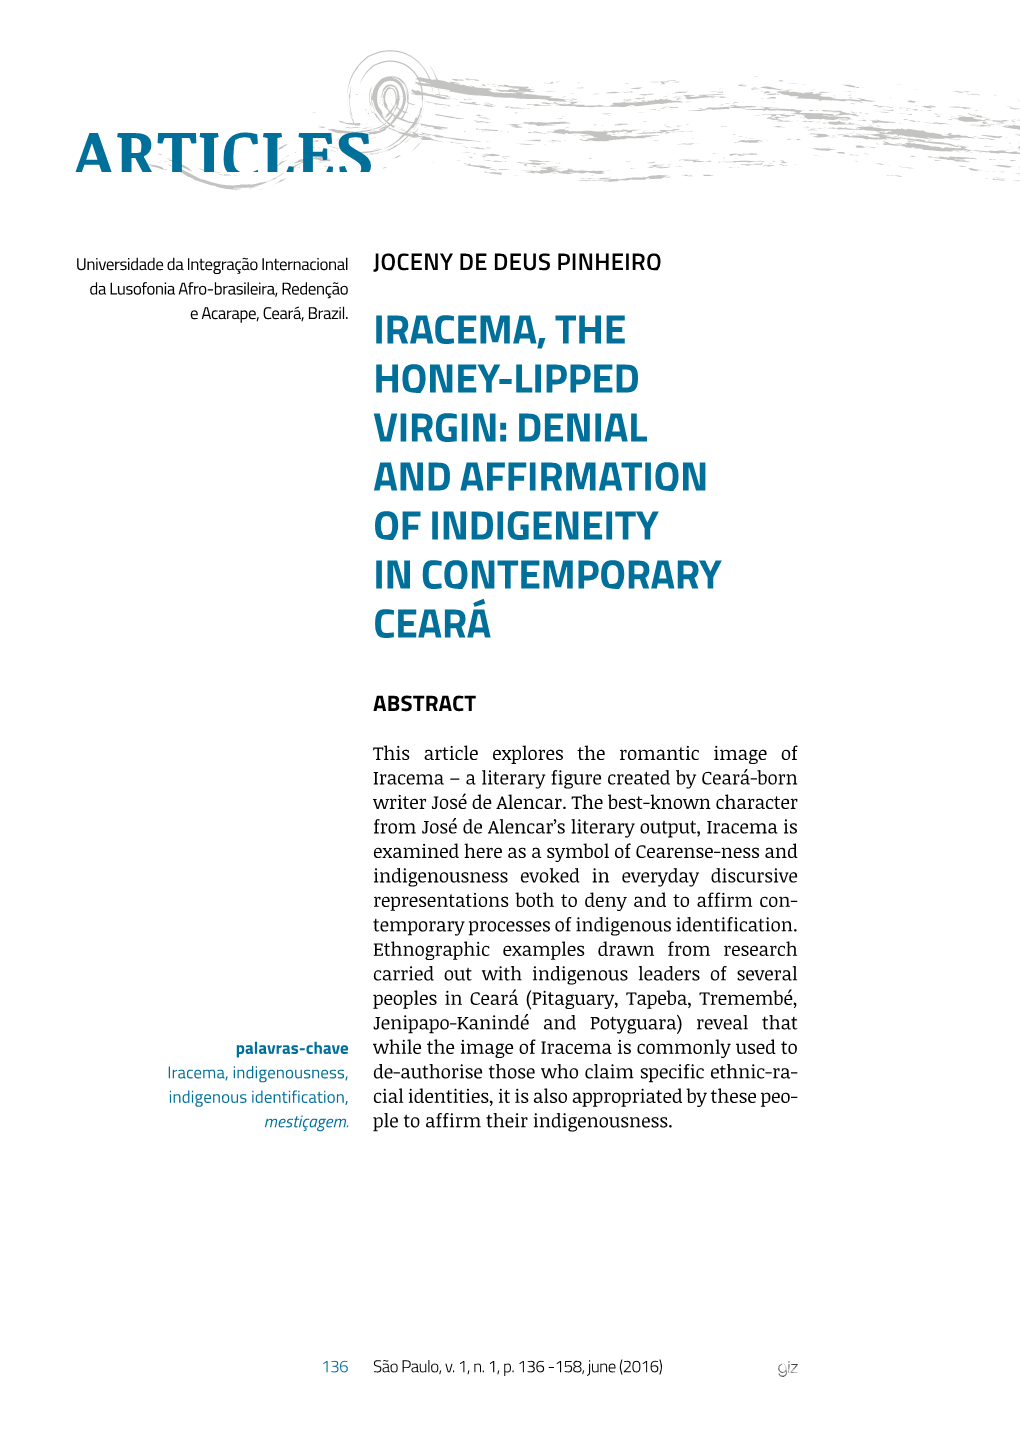 Iracema, the Honey-Lipped Virgin: Denial and Affirmation of Indigeneity in Contemporary Ceará